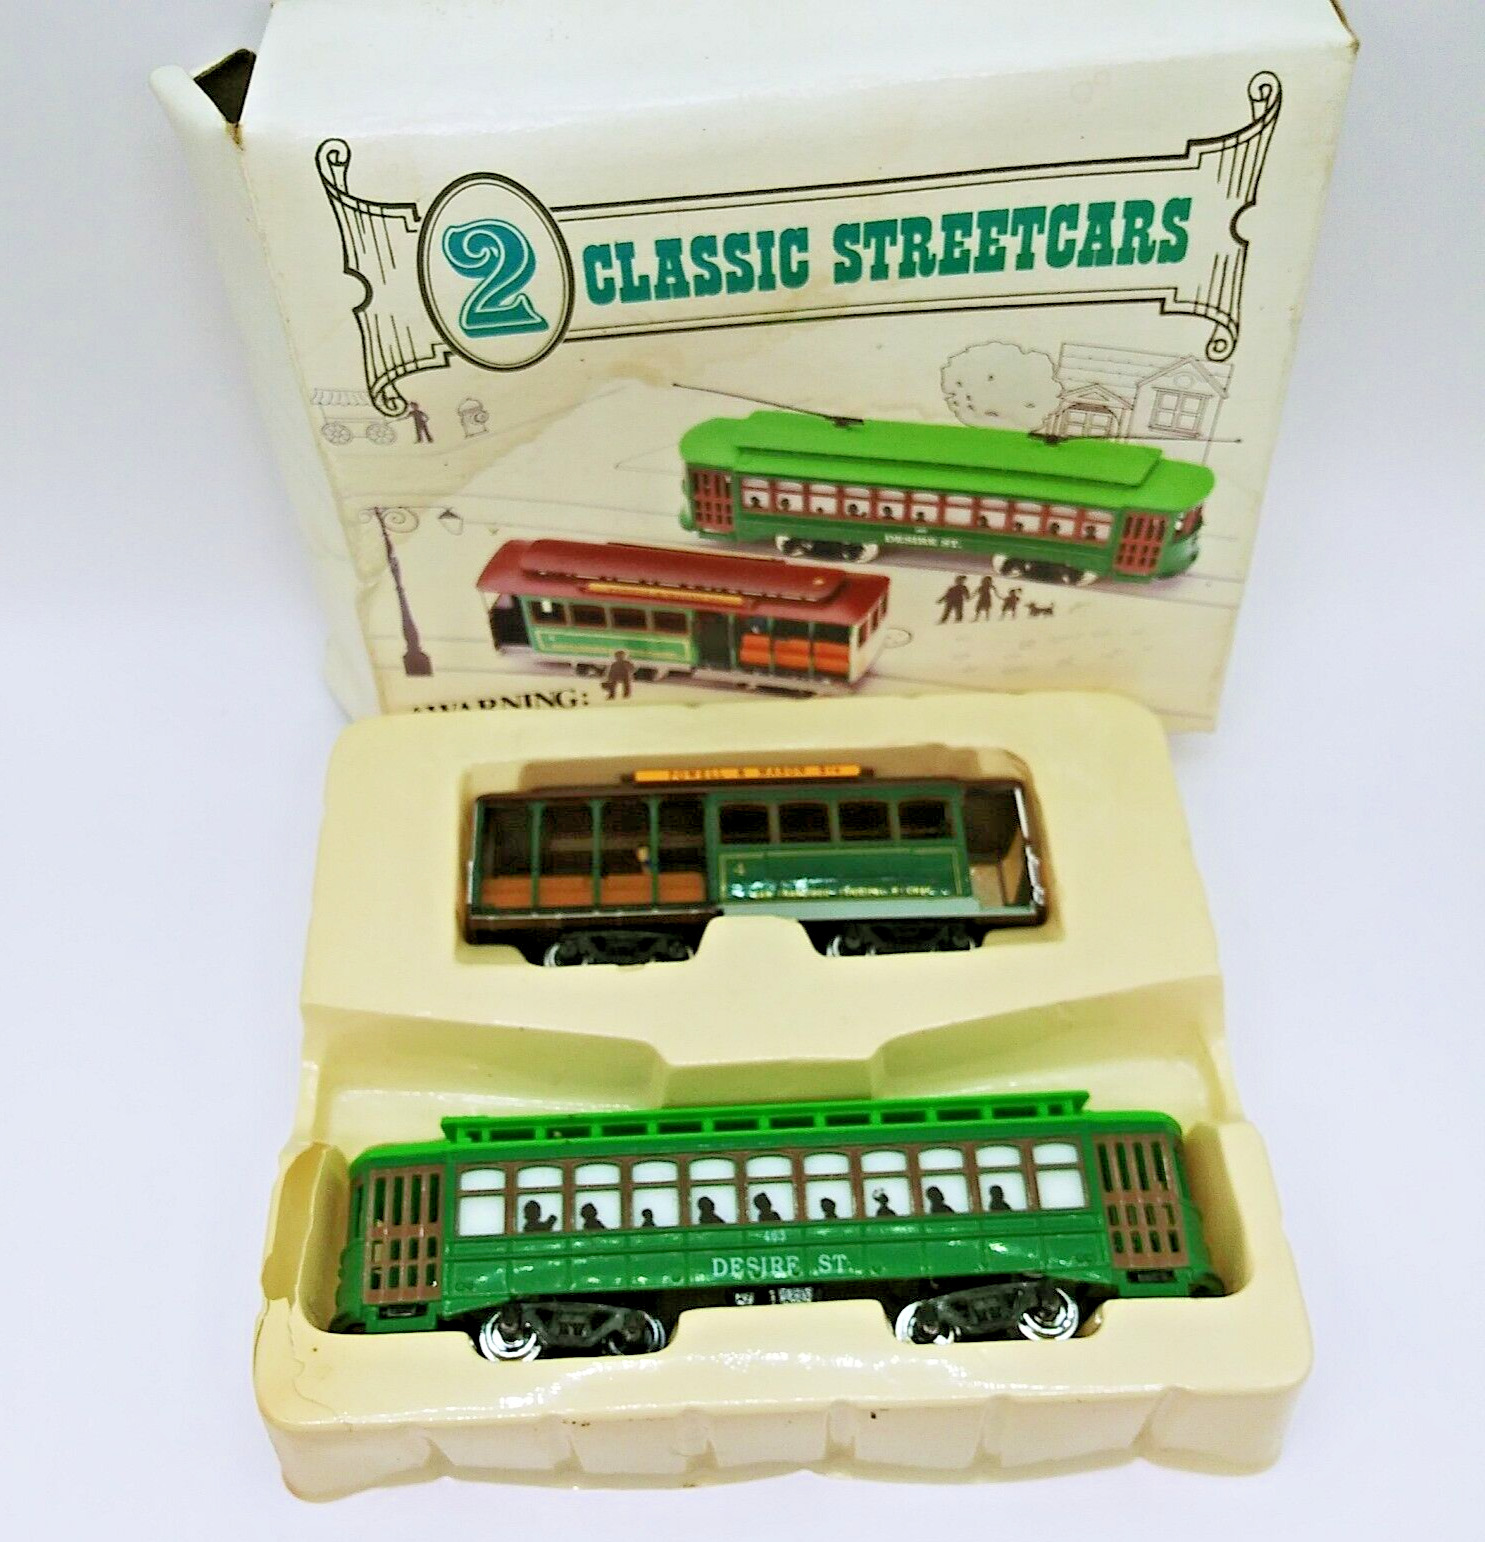 Classic Streetcars set HO Scale Trolleys Desire St San Francisco Toy Models READ